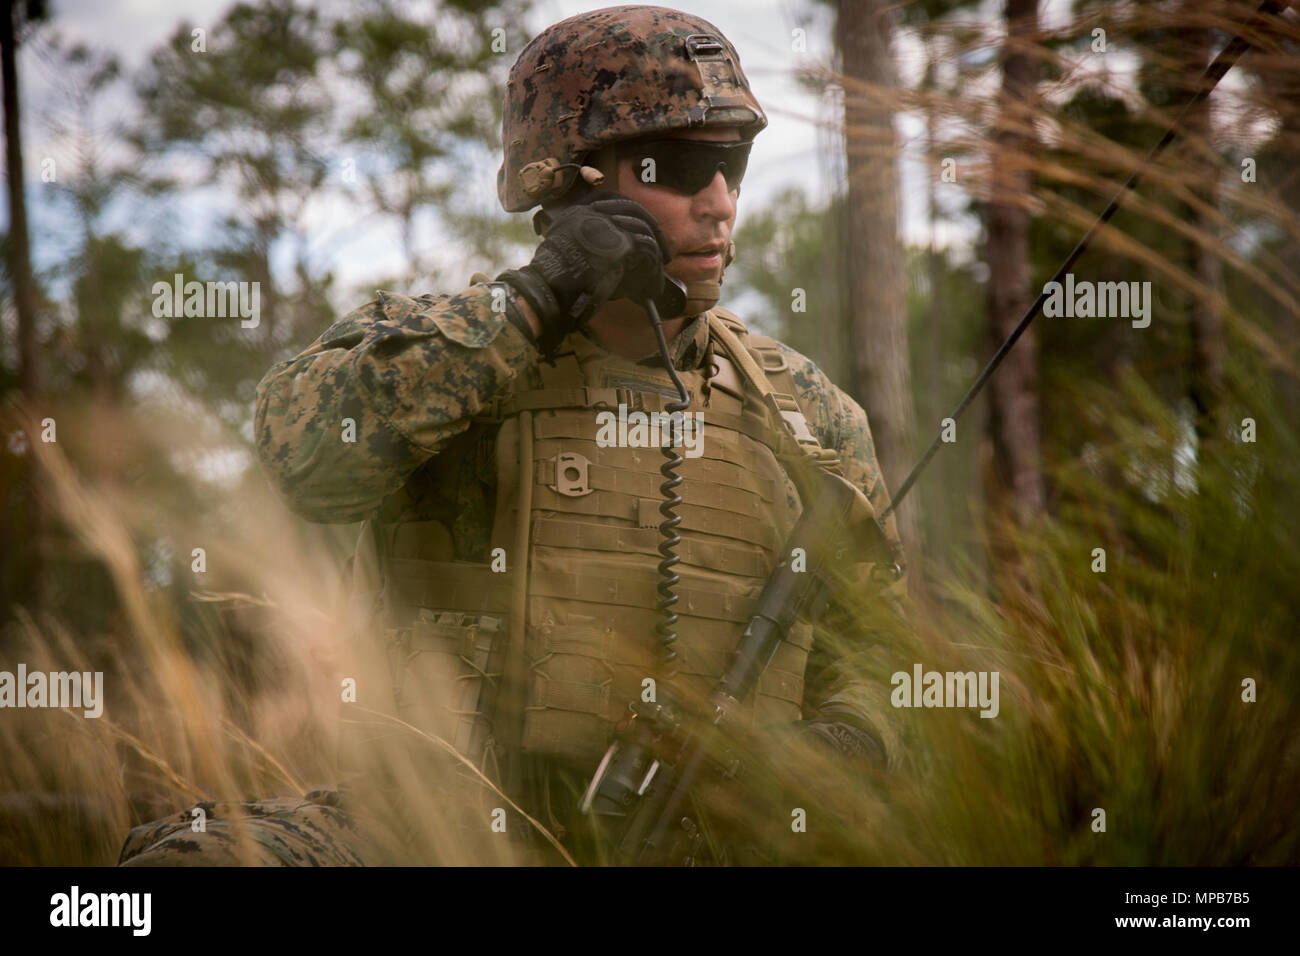 A U.S. Marine attached to Advanced Infantry Training Battalion, School of Infantry-East (SOI-E), talks on his radio during a combined arms exercise at Camp Lejeune, N.C., April 7, 2017. The mission of SOI-E is to train entry-level and advanced level Marines in the skills required of an Infantry Marine for the operating forces. Stock Photo